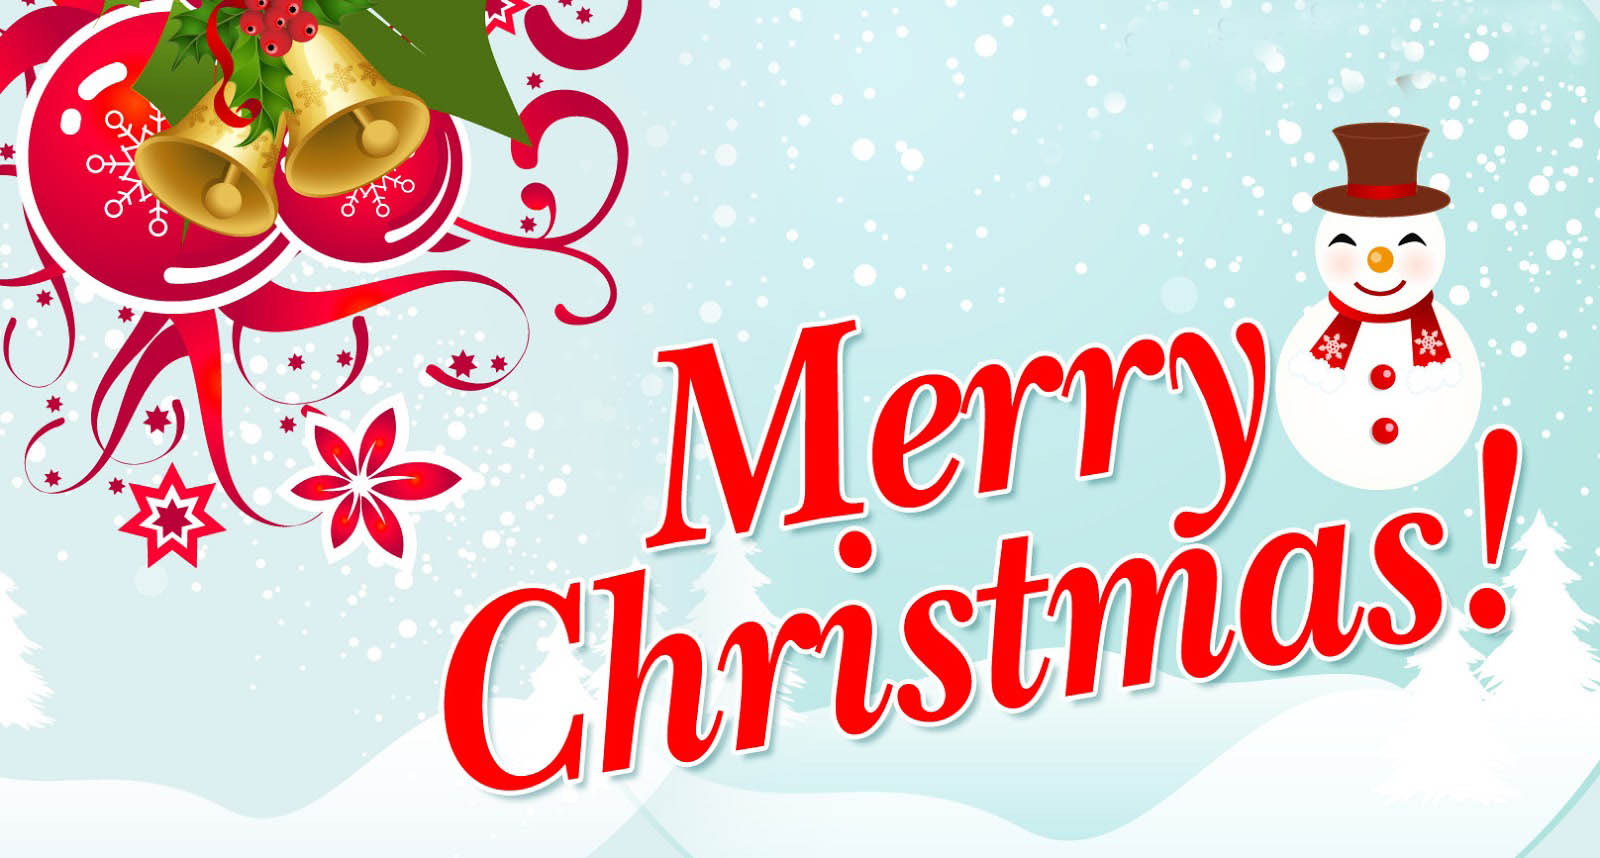 Happy Christmas Wishes Free Wallpaper